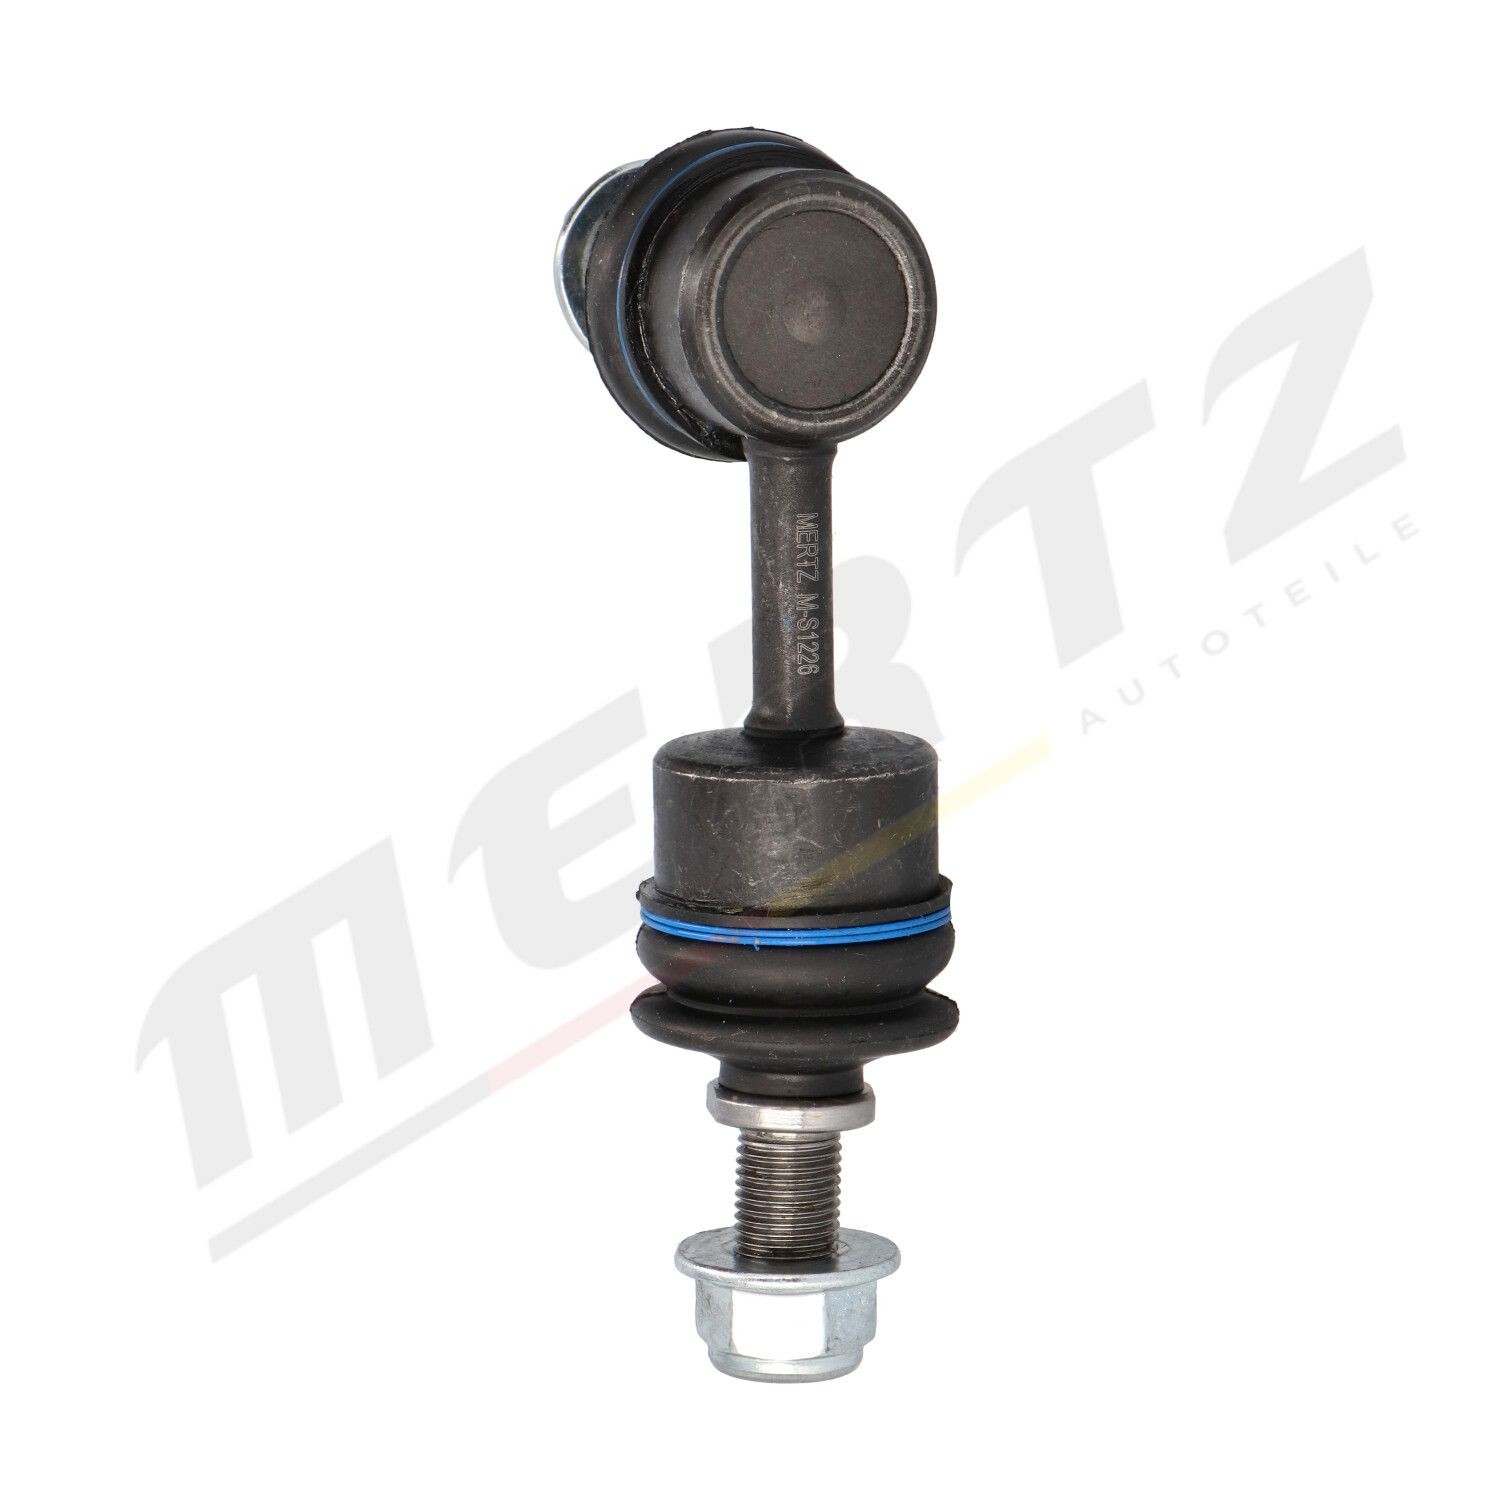 MS1226 Track control arm MERTZ M-S1226 review and test